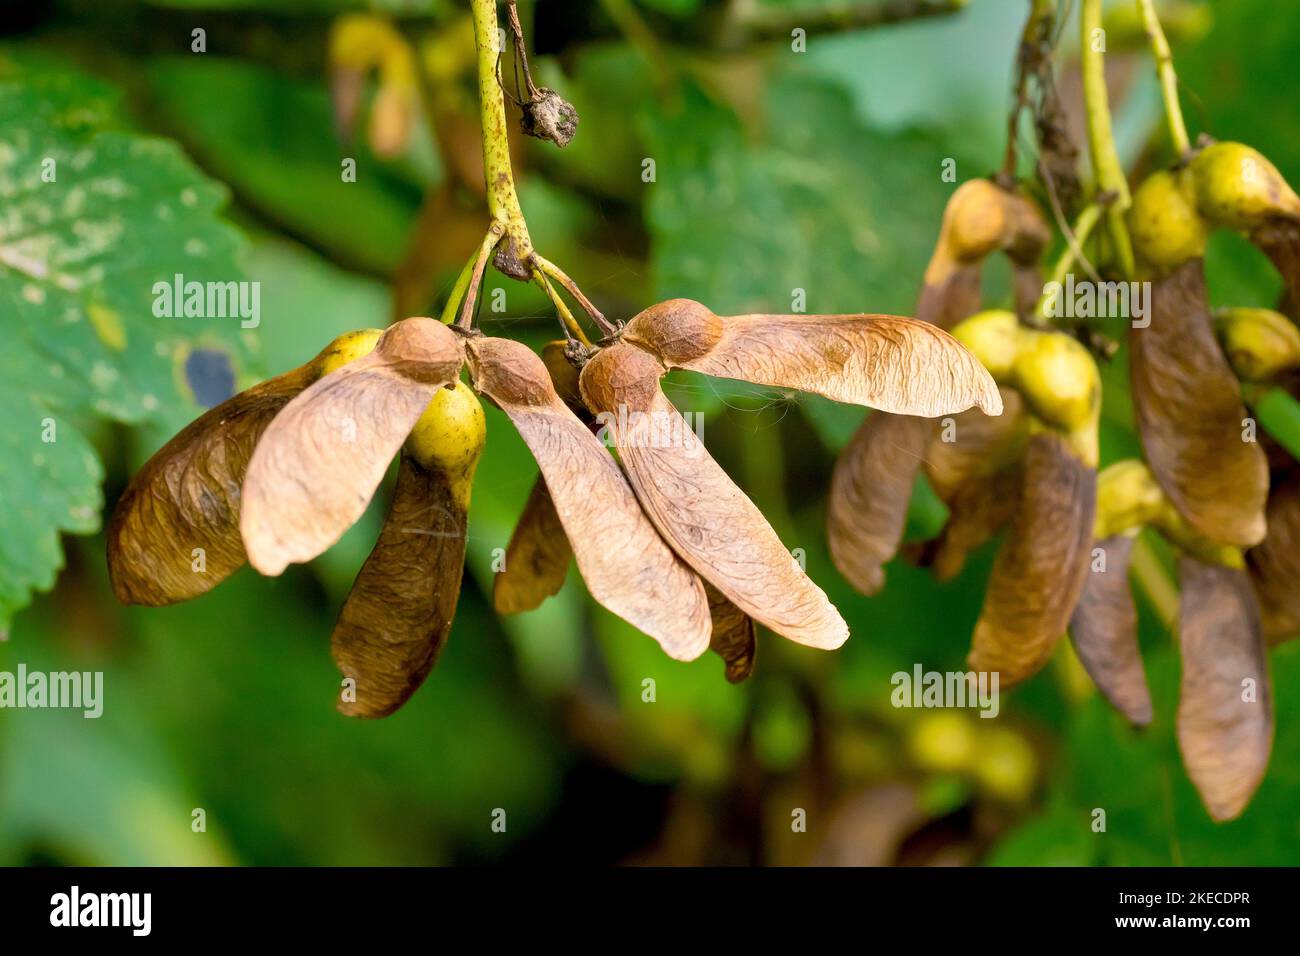 Sycamore (acer pseudoplatanus), close up of several of the familiar ripe winged fruits or seeds produced by the tree in the autumn. Stock Photo